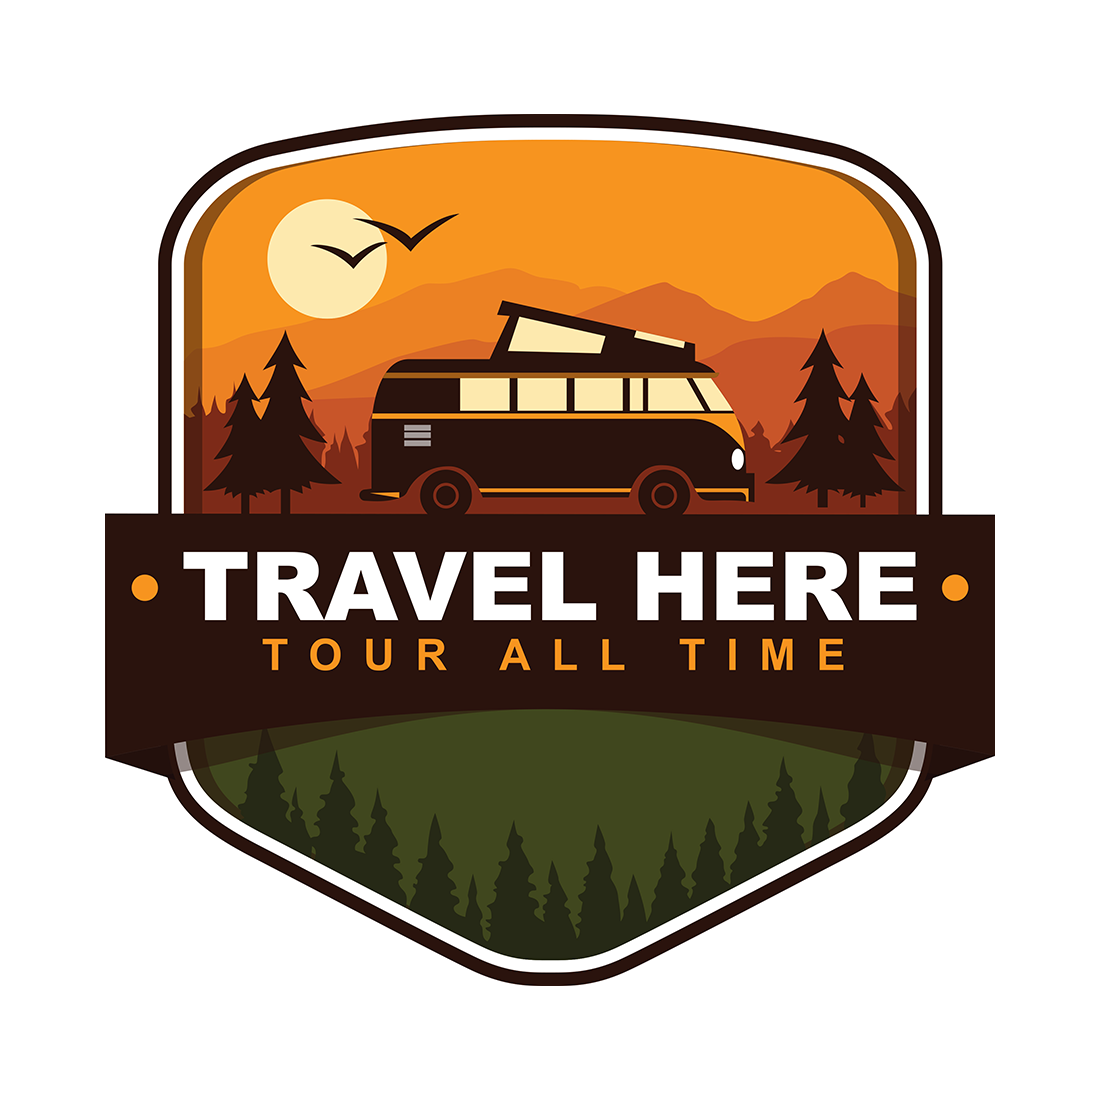 Logo for a travel company with a van in the background.